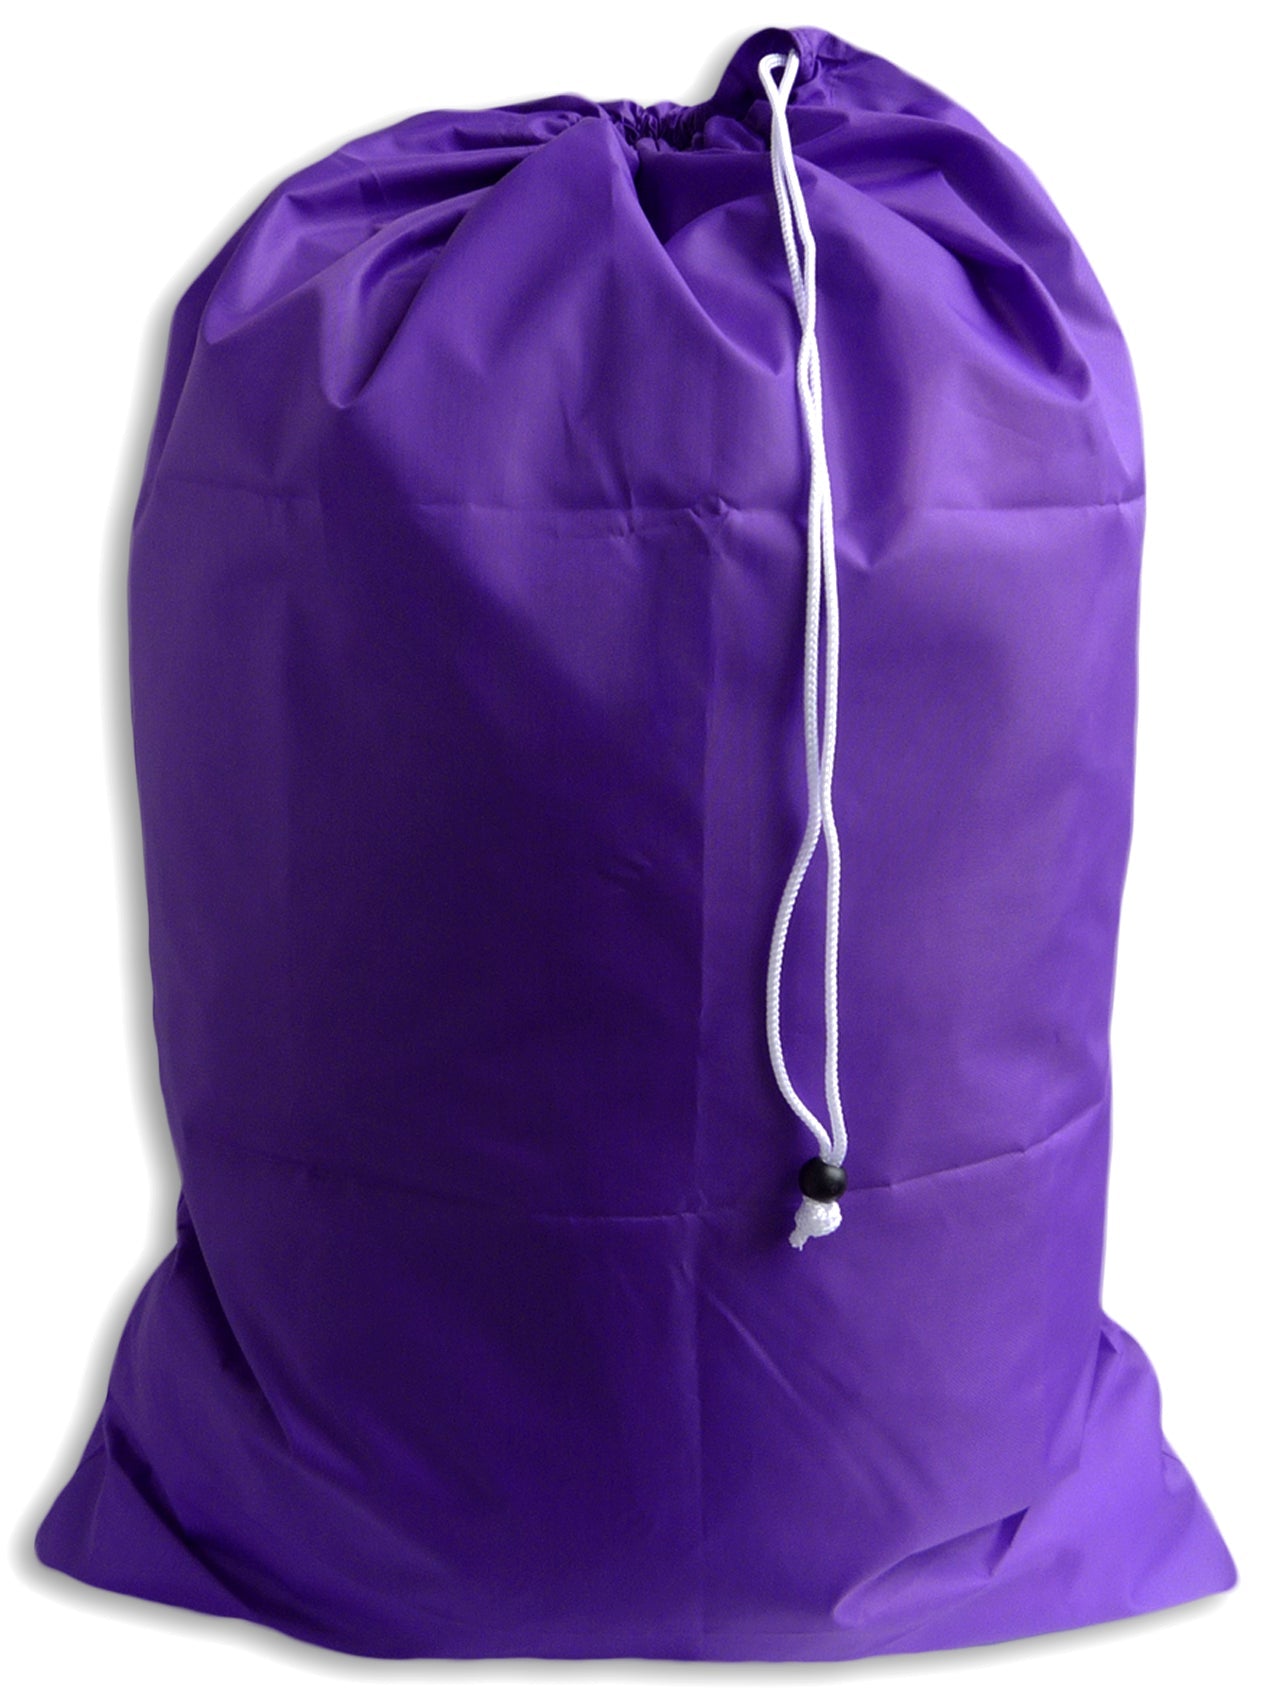  Nylon Laundry Bag - Locking Drawstring Closure and Machine  Washable. These Large Bags will Fit a Laundry Basket or Hamper and Strong  Enough to Carry up to Three Loads of Clothes. (